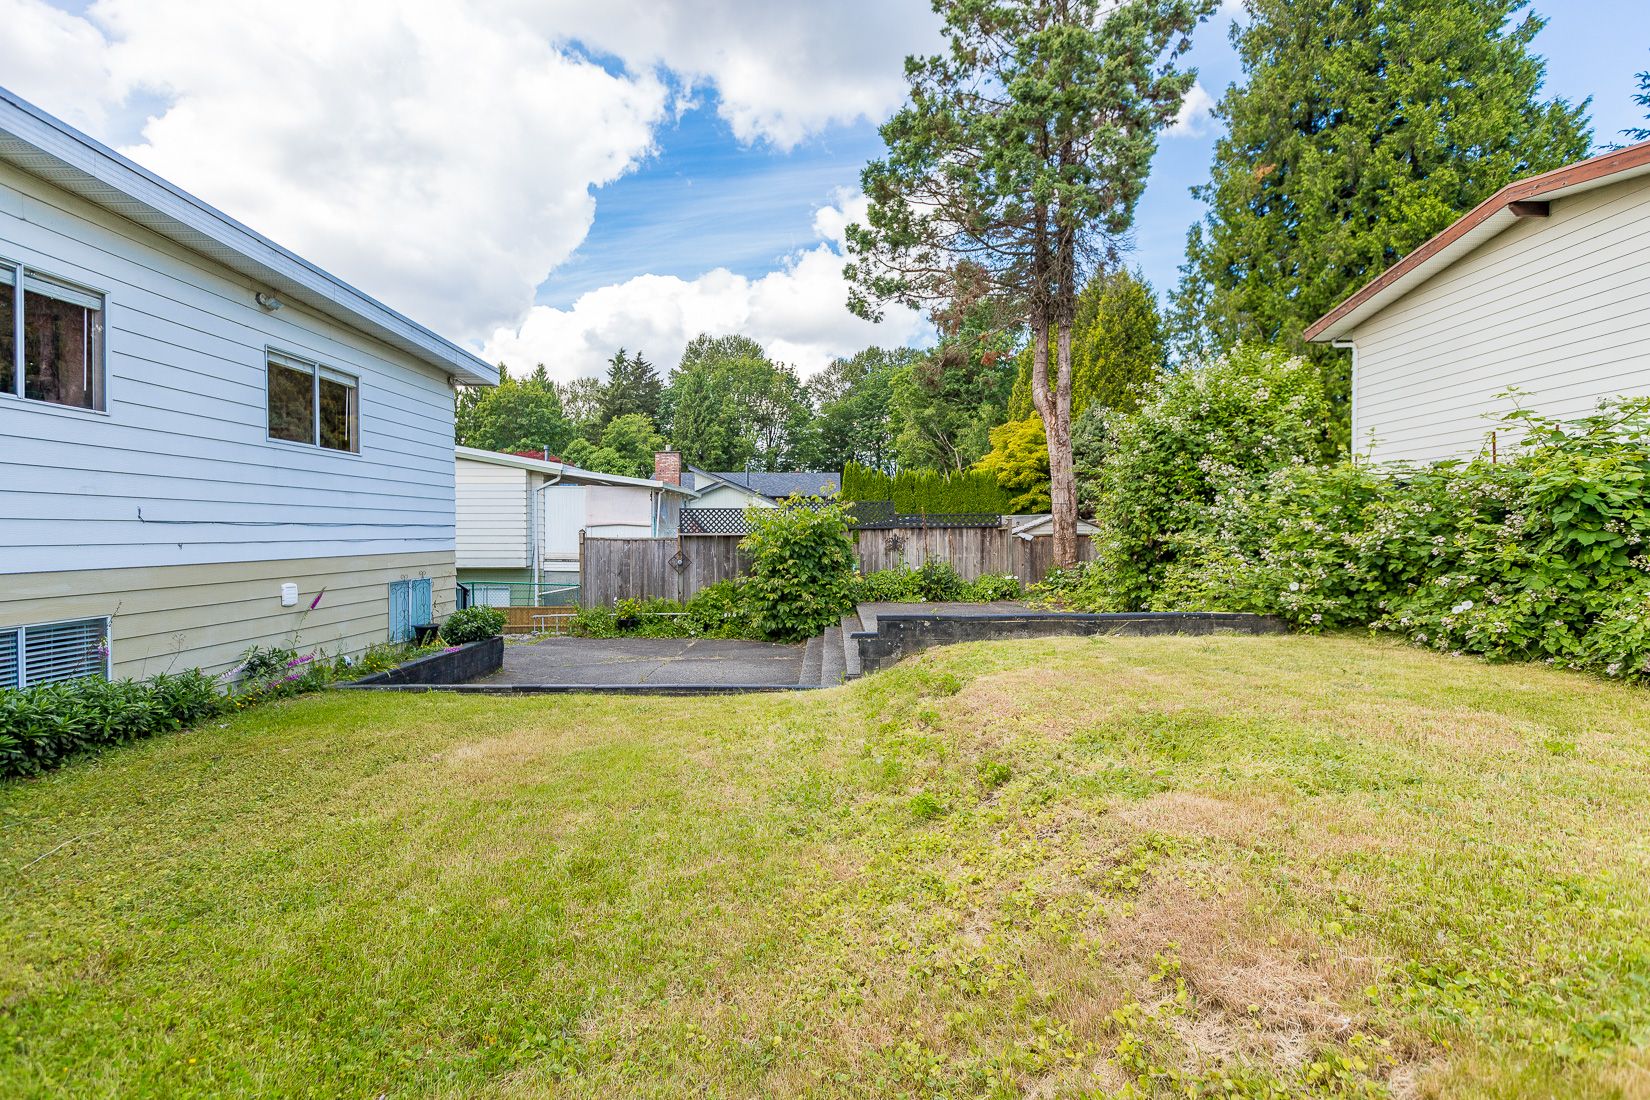 Photo 39: Photos: SPRINGDALE CT in BURNABY: Parkcrest House for sale (Burnaby North)  : MLS®# R2591718